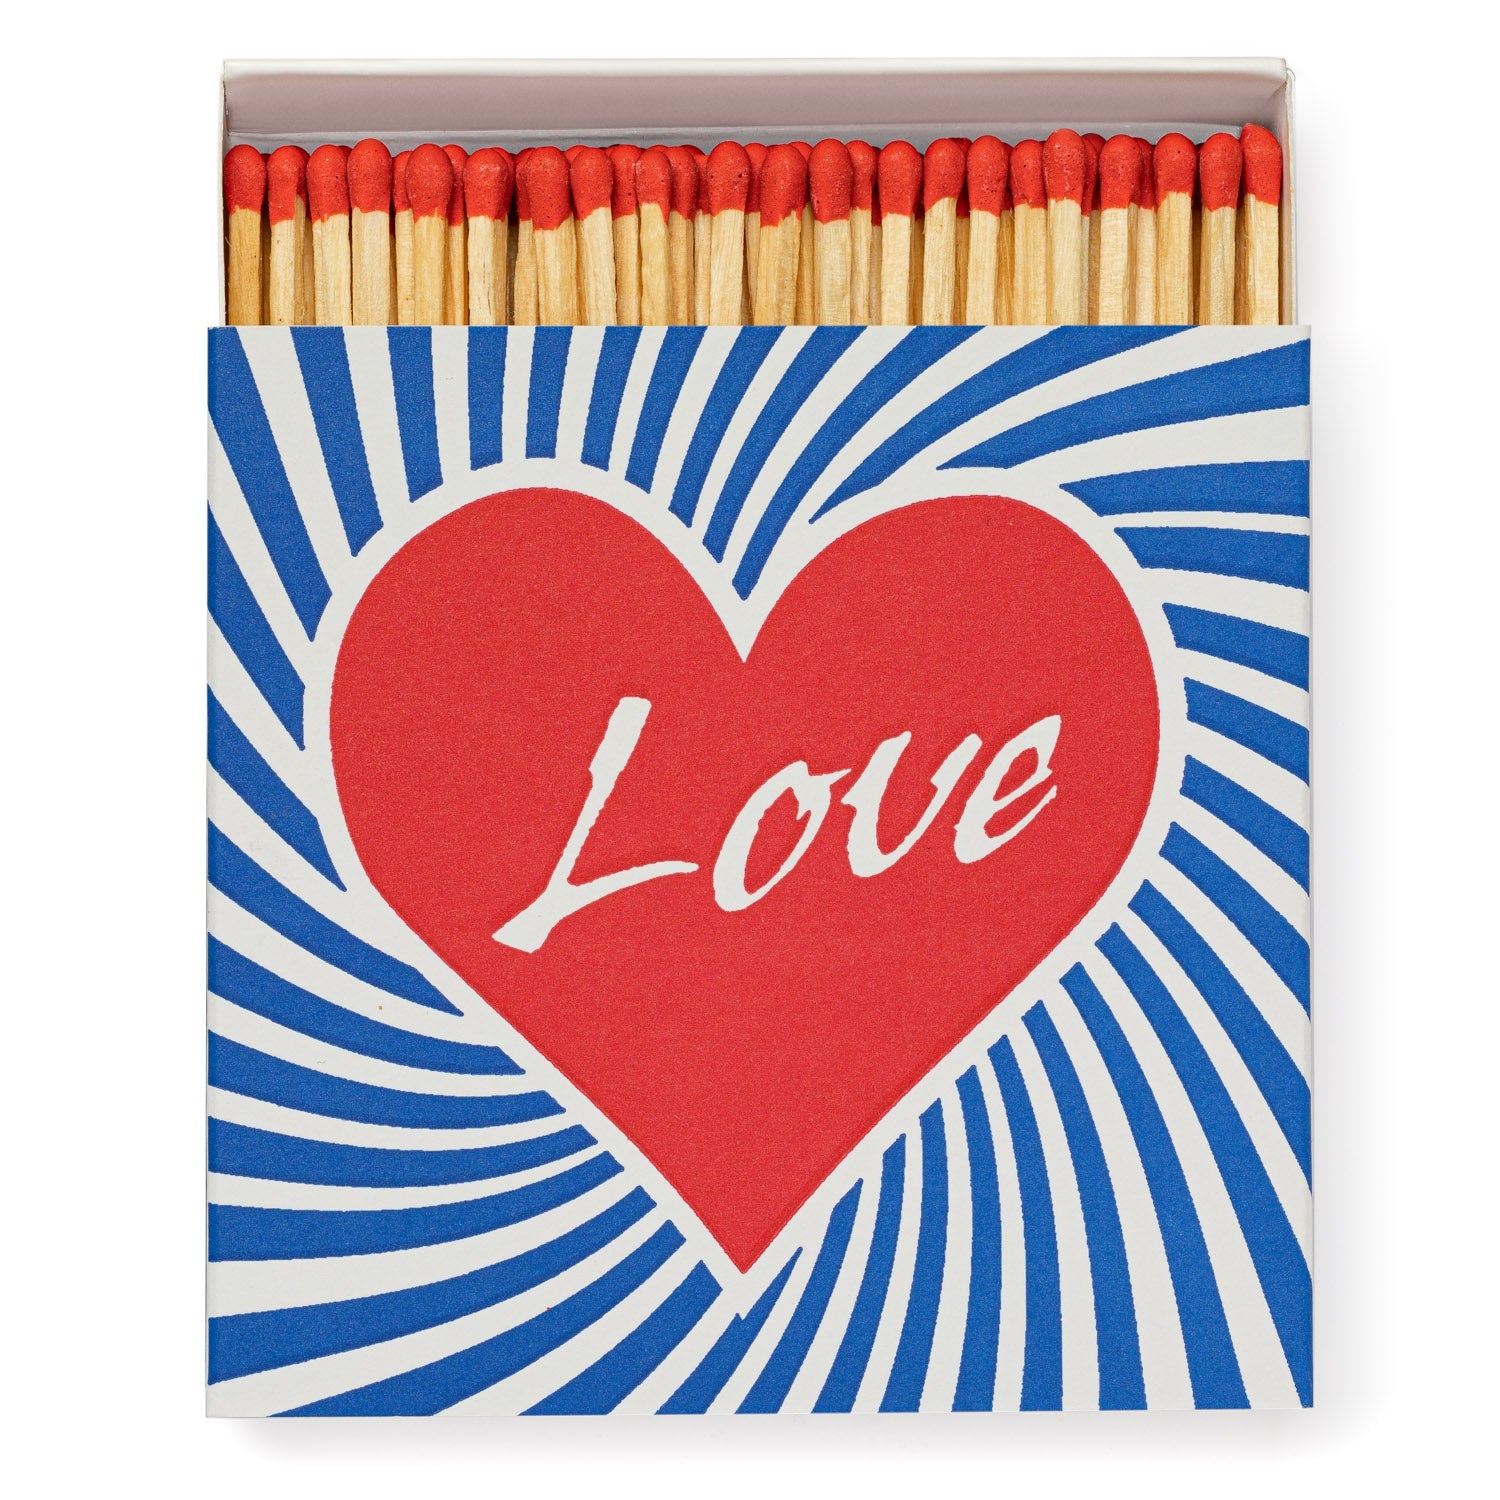 Luxury Matches - LOVE - Life of Riley